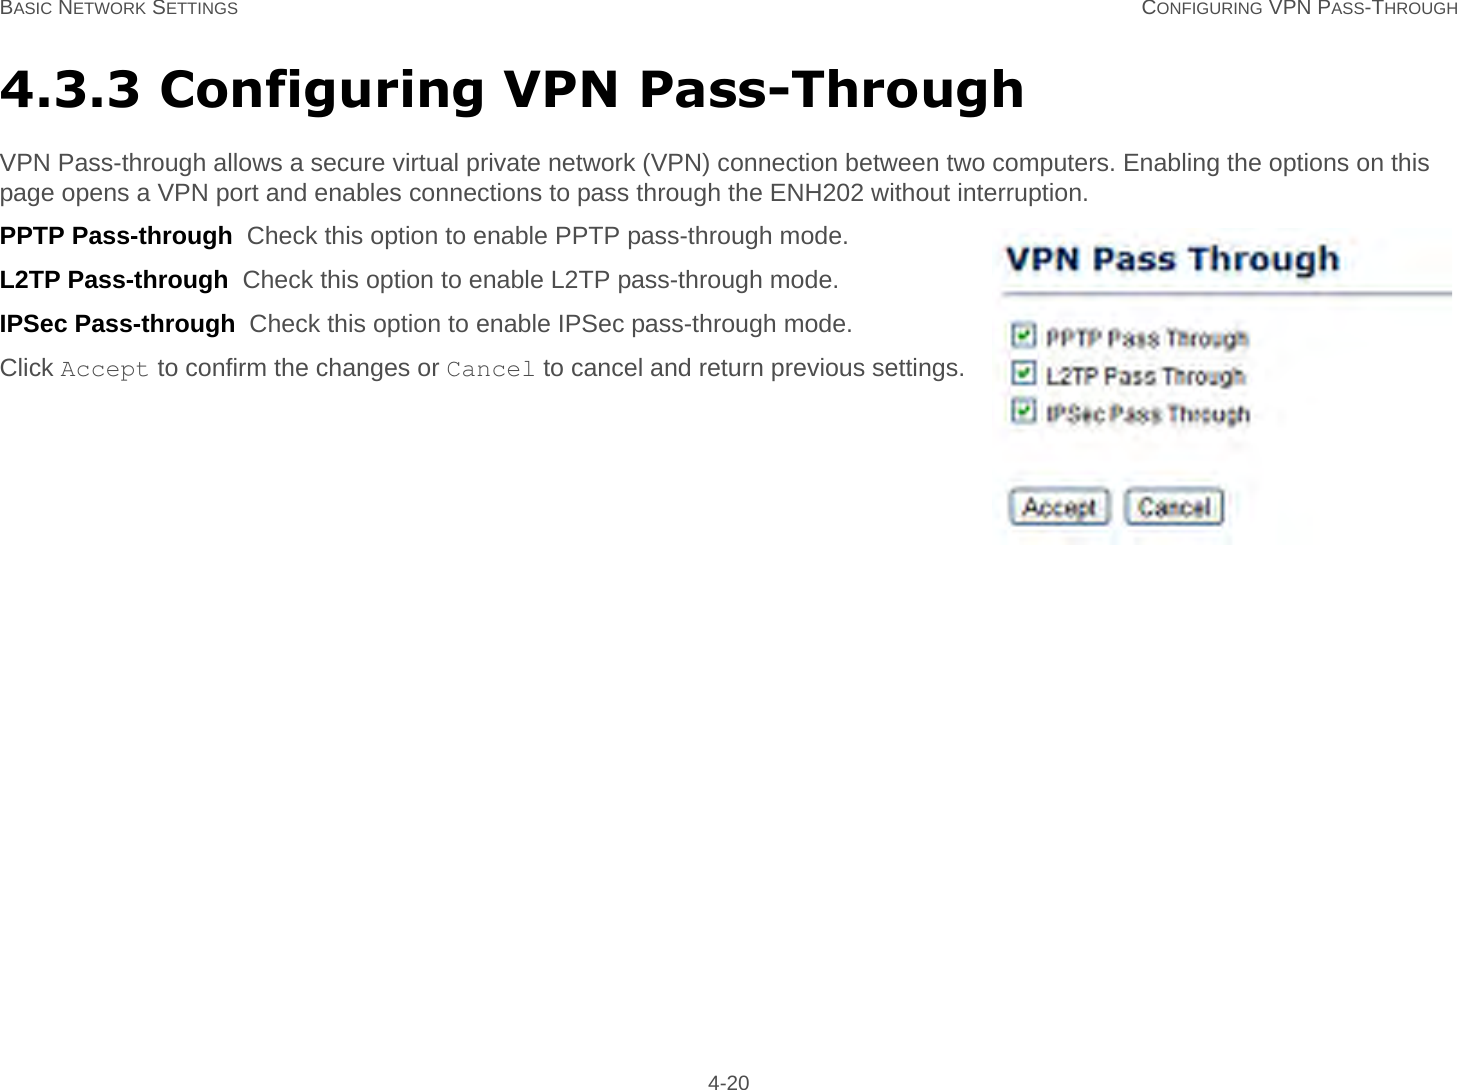 BASIC NETWORK SETTINGS CONFIGURING VPN PASS-THROUGH 4-204.3.3 Configuring VPN Pass-ThroughVPN Pass-through allows a secure virtual private network (VPN) connection between two computers. Enabling the options on this page opens a VPN port and enables connections to pass through the ENH202 without interruption.PPTP Pass-through  Check this option to enable PPTP pass-through mode.L2TP Pass-through  Check this option to enable L2TP pass-through mode.IPSec Pass-through  Check this option to enable IPSec pass-through mode.Click Accept to confirm the changes or Cancel to cancel and return previous settings.